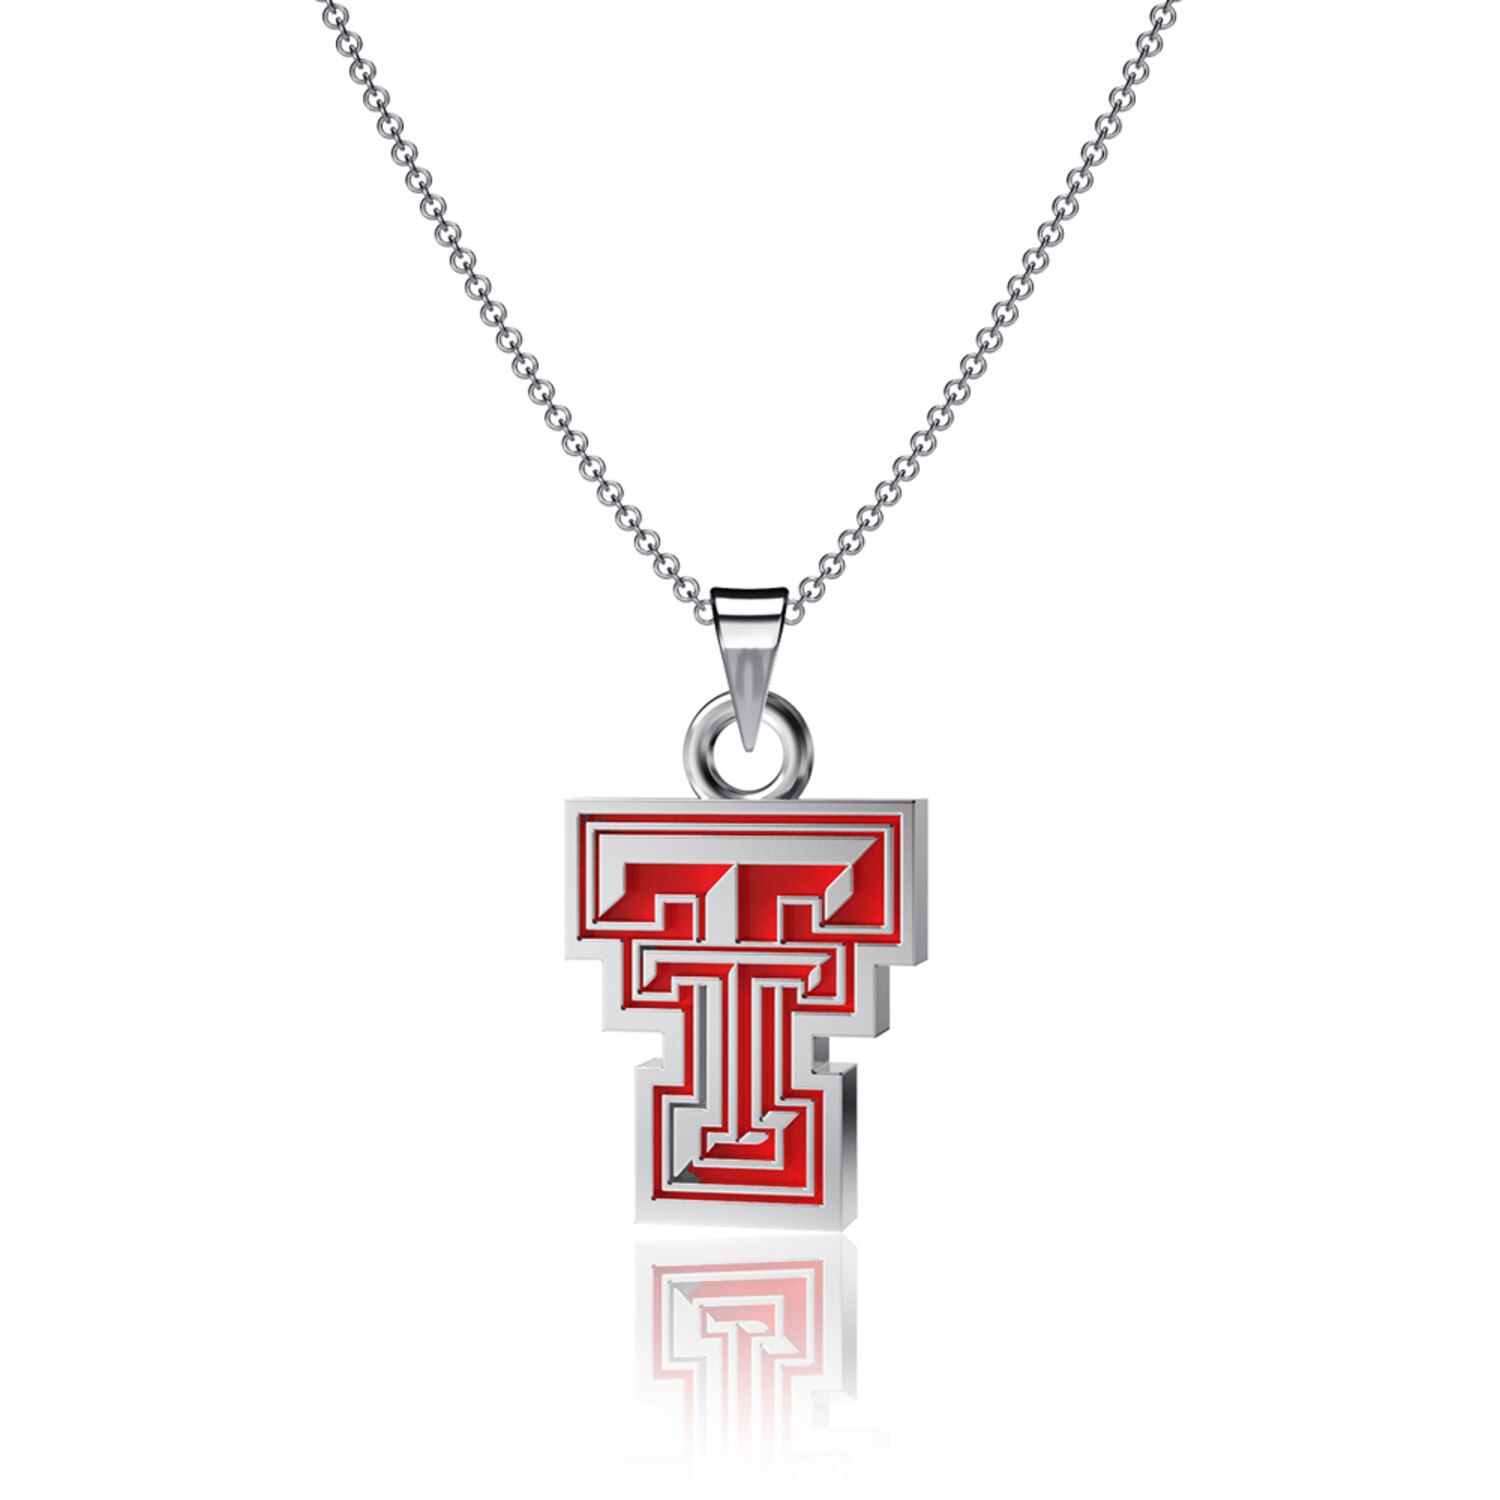 Image for Unbranded Dayna Designs Texas Tech Red Raiders Enamel Pendant Necklace at Kohl's.